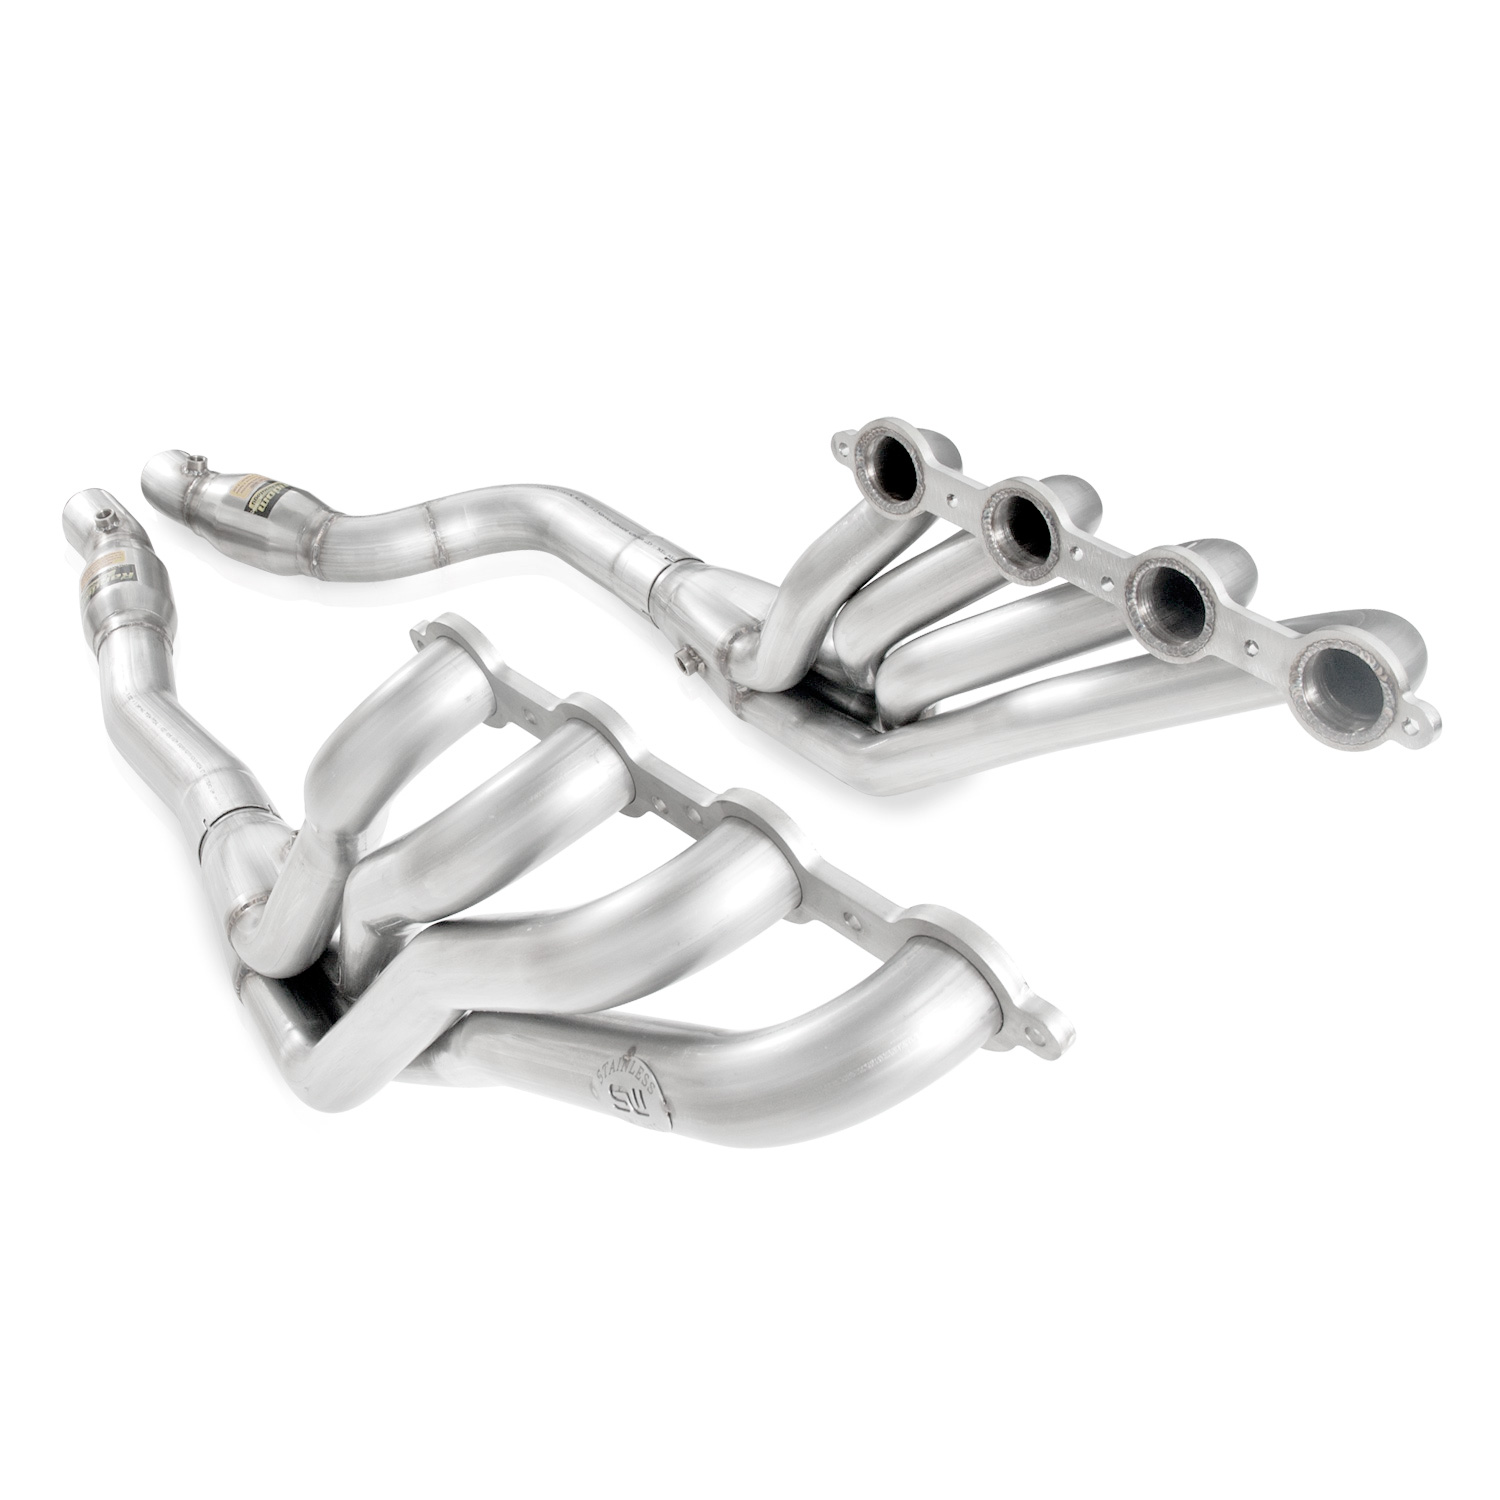 2009-2015 Cadillac CTS-V Coupe, Sedan, Wagon LSA 6.2L SW Headers 2" With Catted Leads Performance Connect